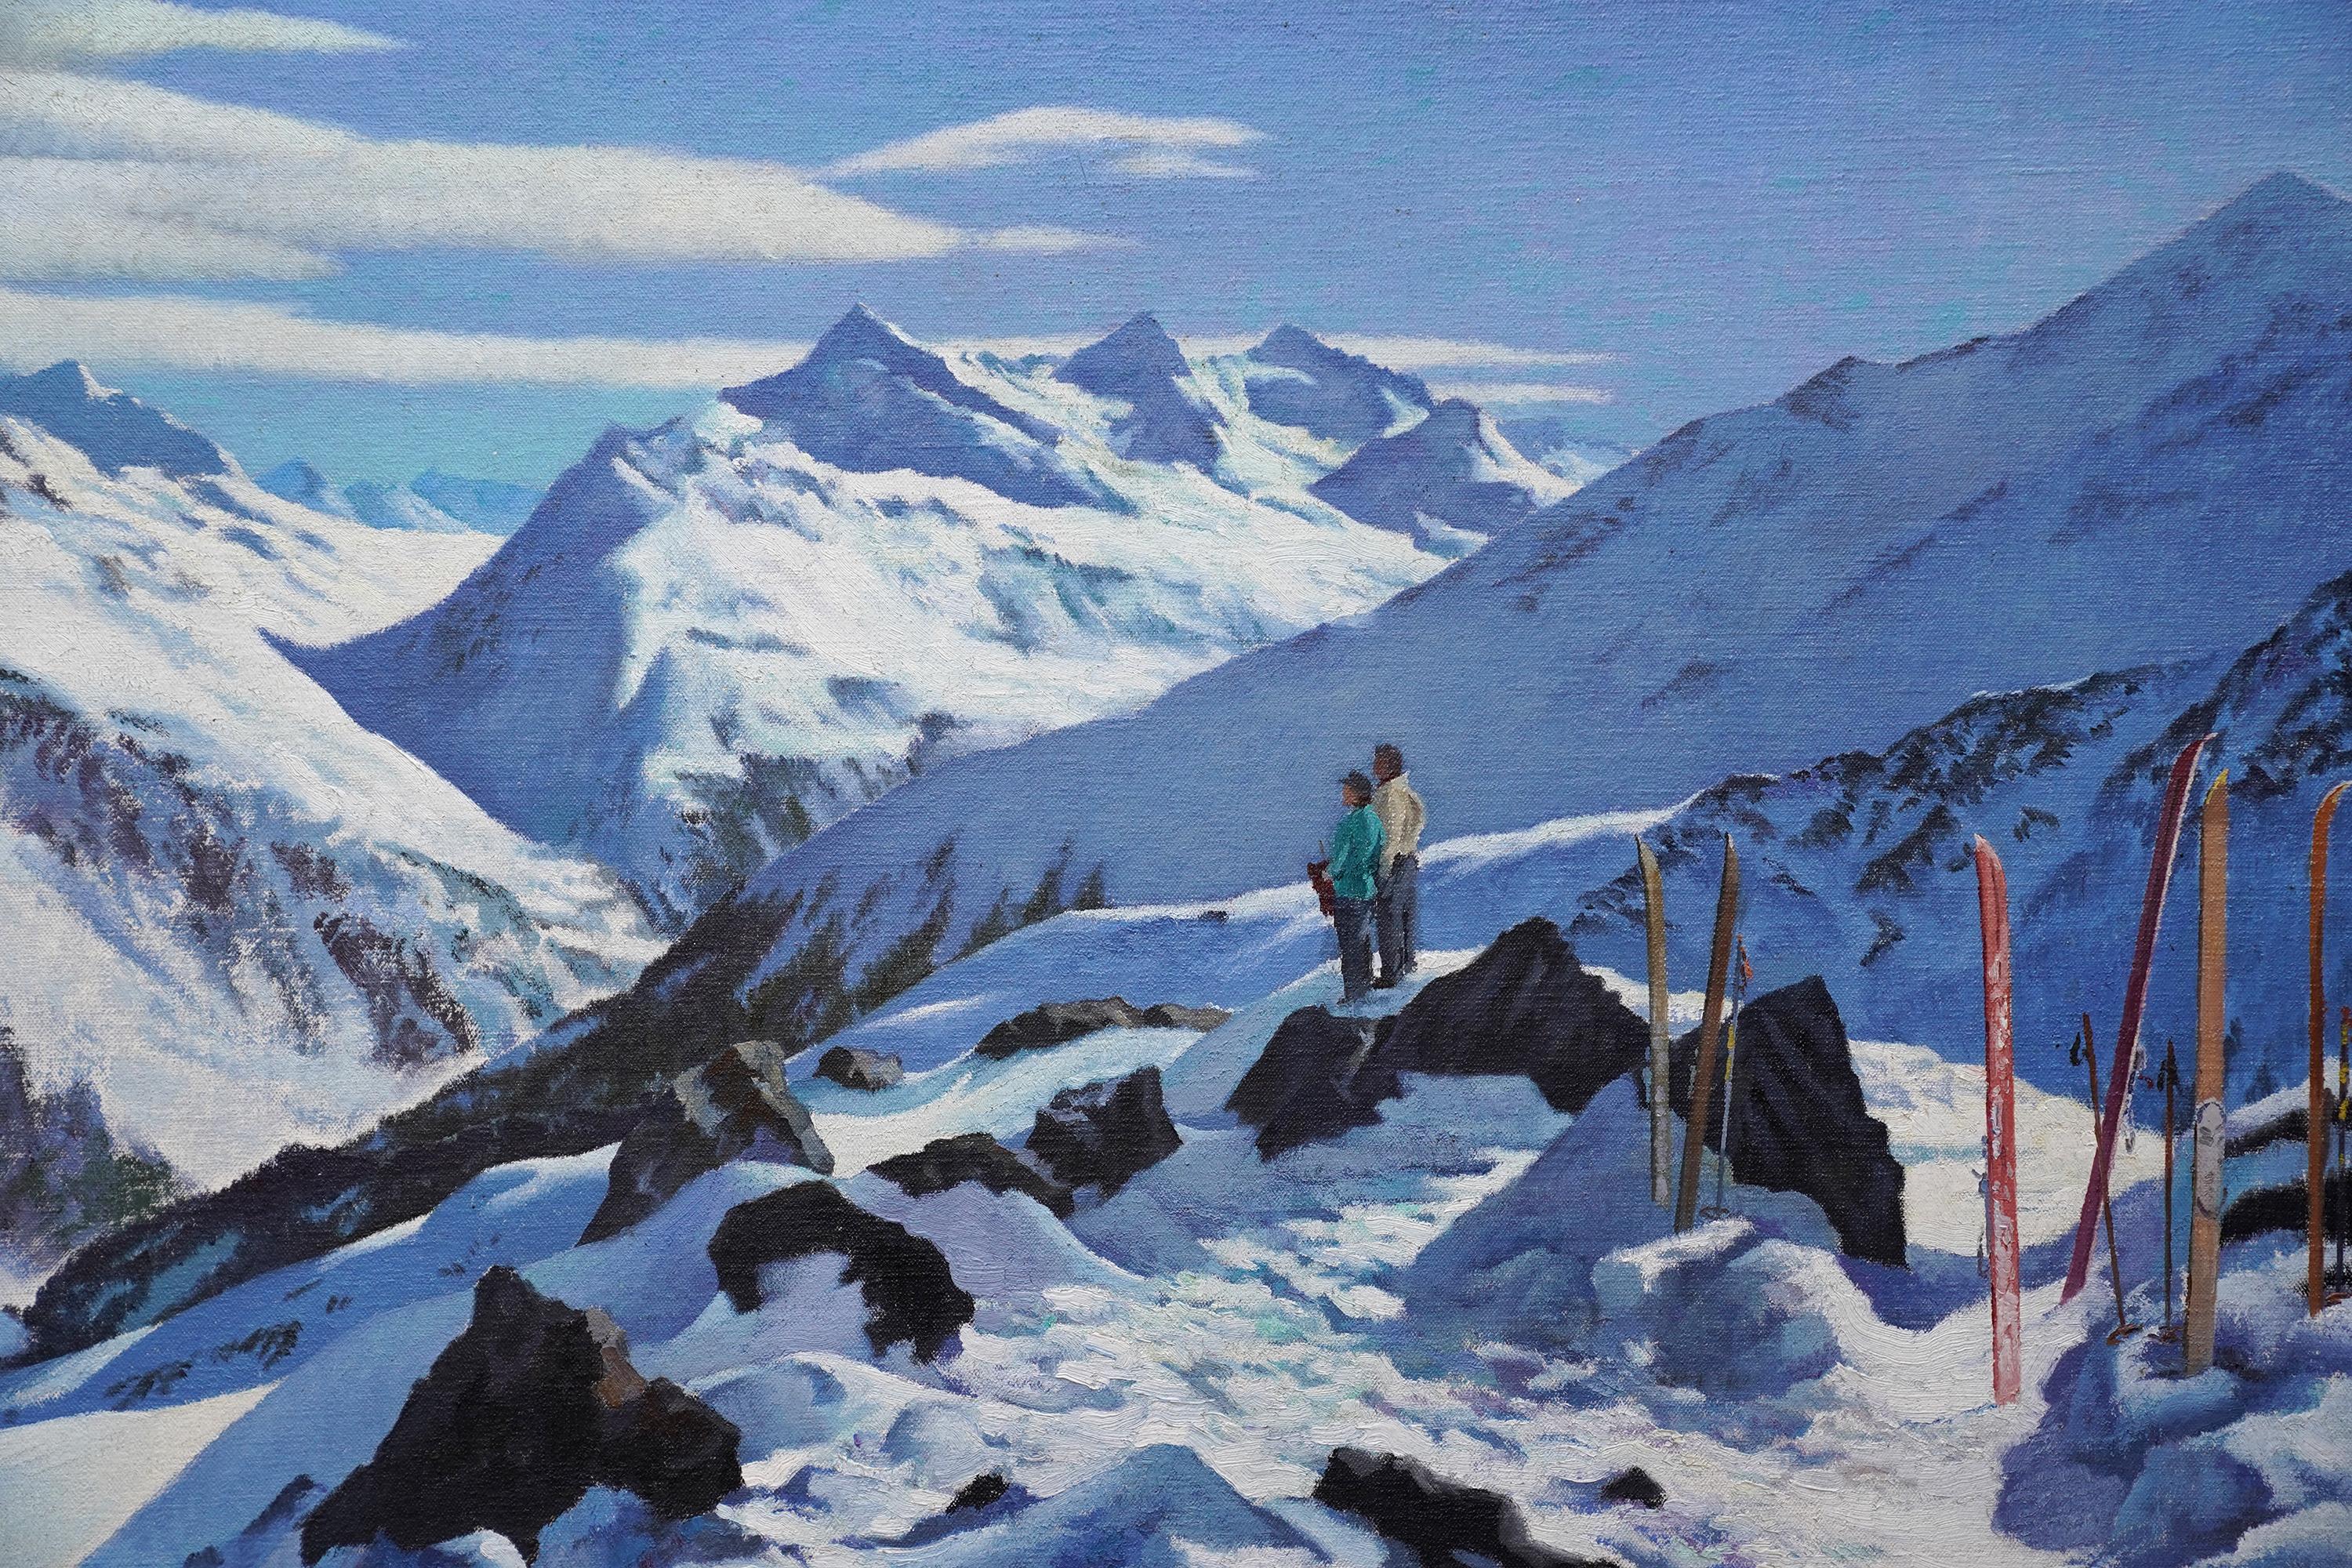 Couple in a Snowy Mountainous Landscape - British 1940's art skiing oil painting - Realist Painting by Francis Wynne Thomas